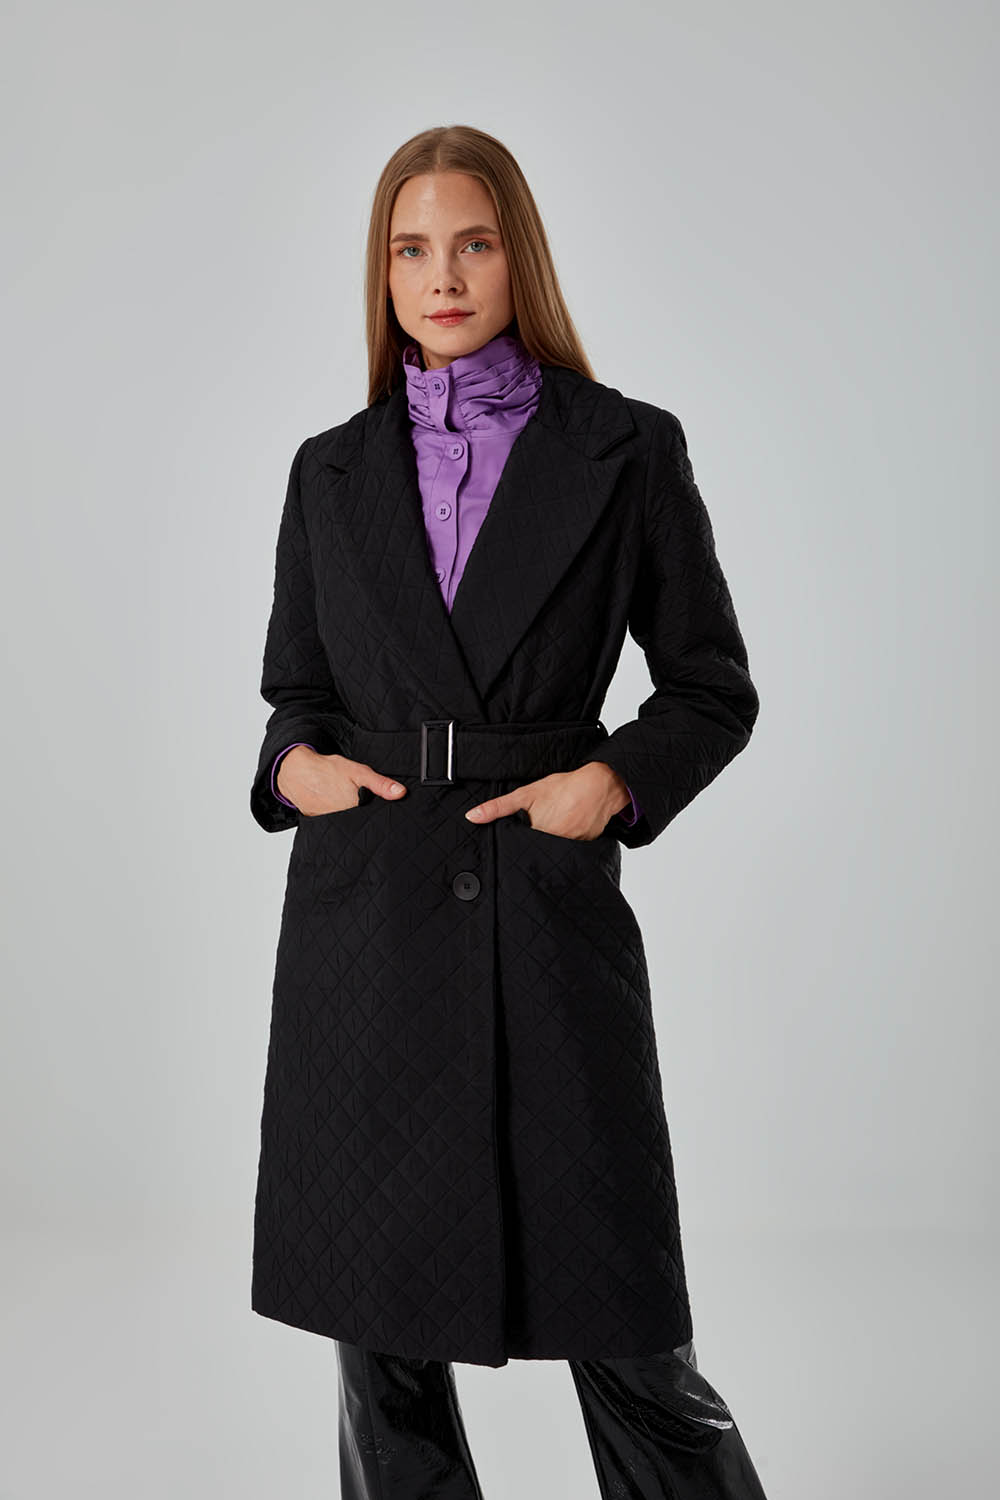 Quilted Textured Black Overcoat